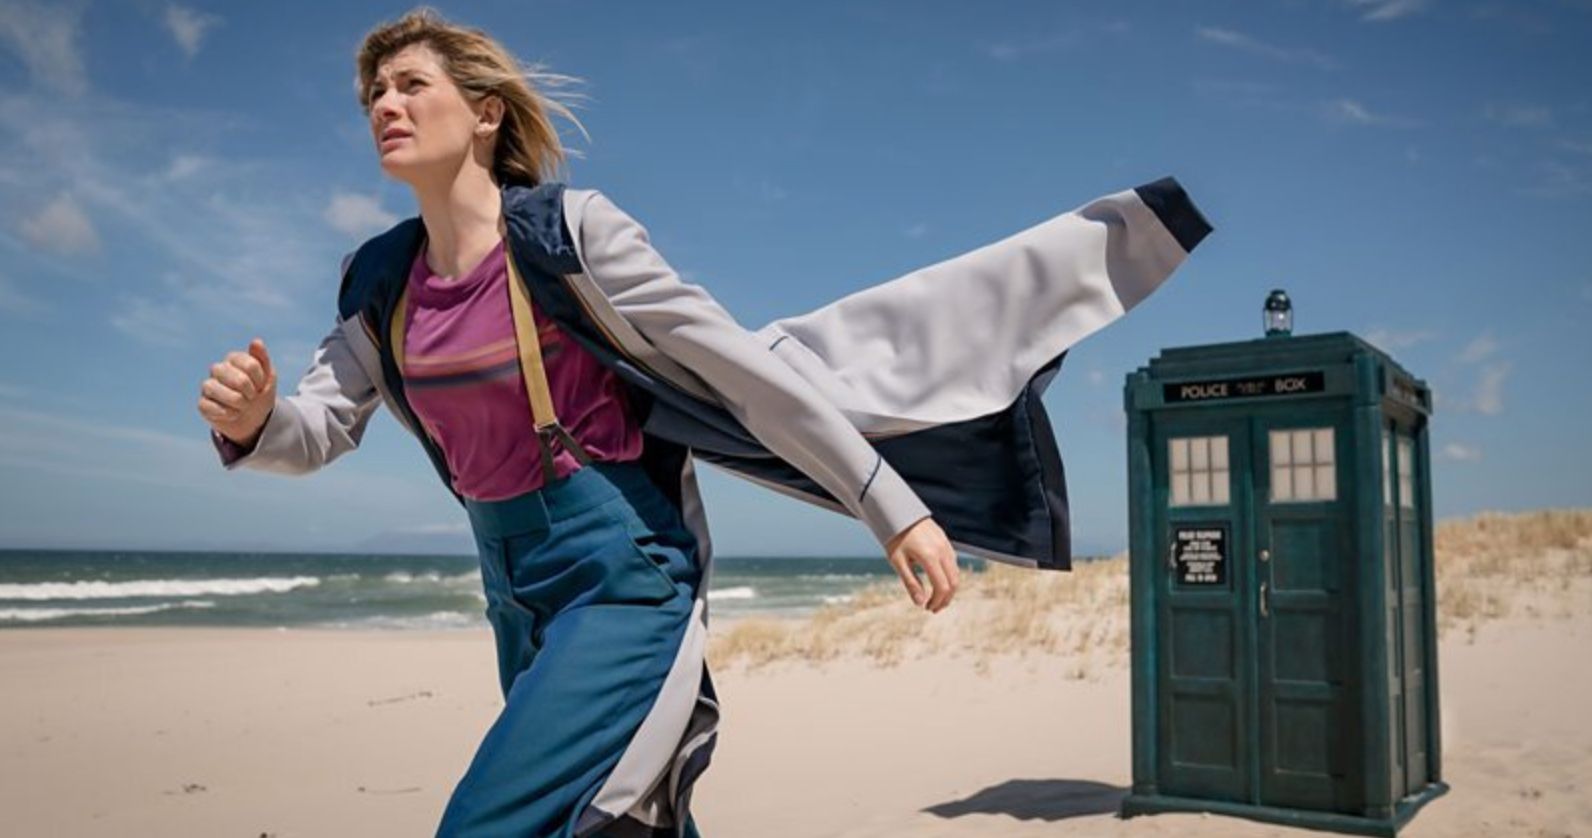 Jodie Whittaker Will Exit Doctor Who in 2022 Alongside Showrunner Chris Chibnall